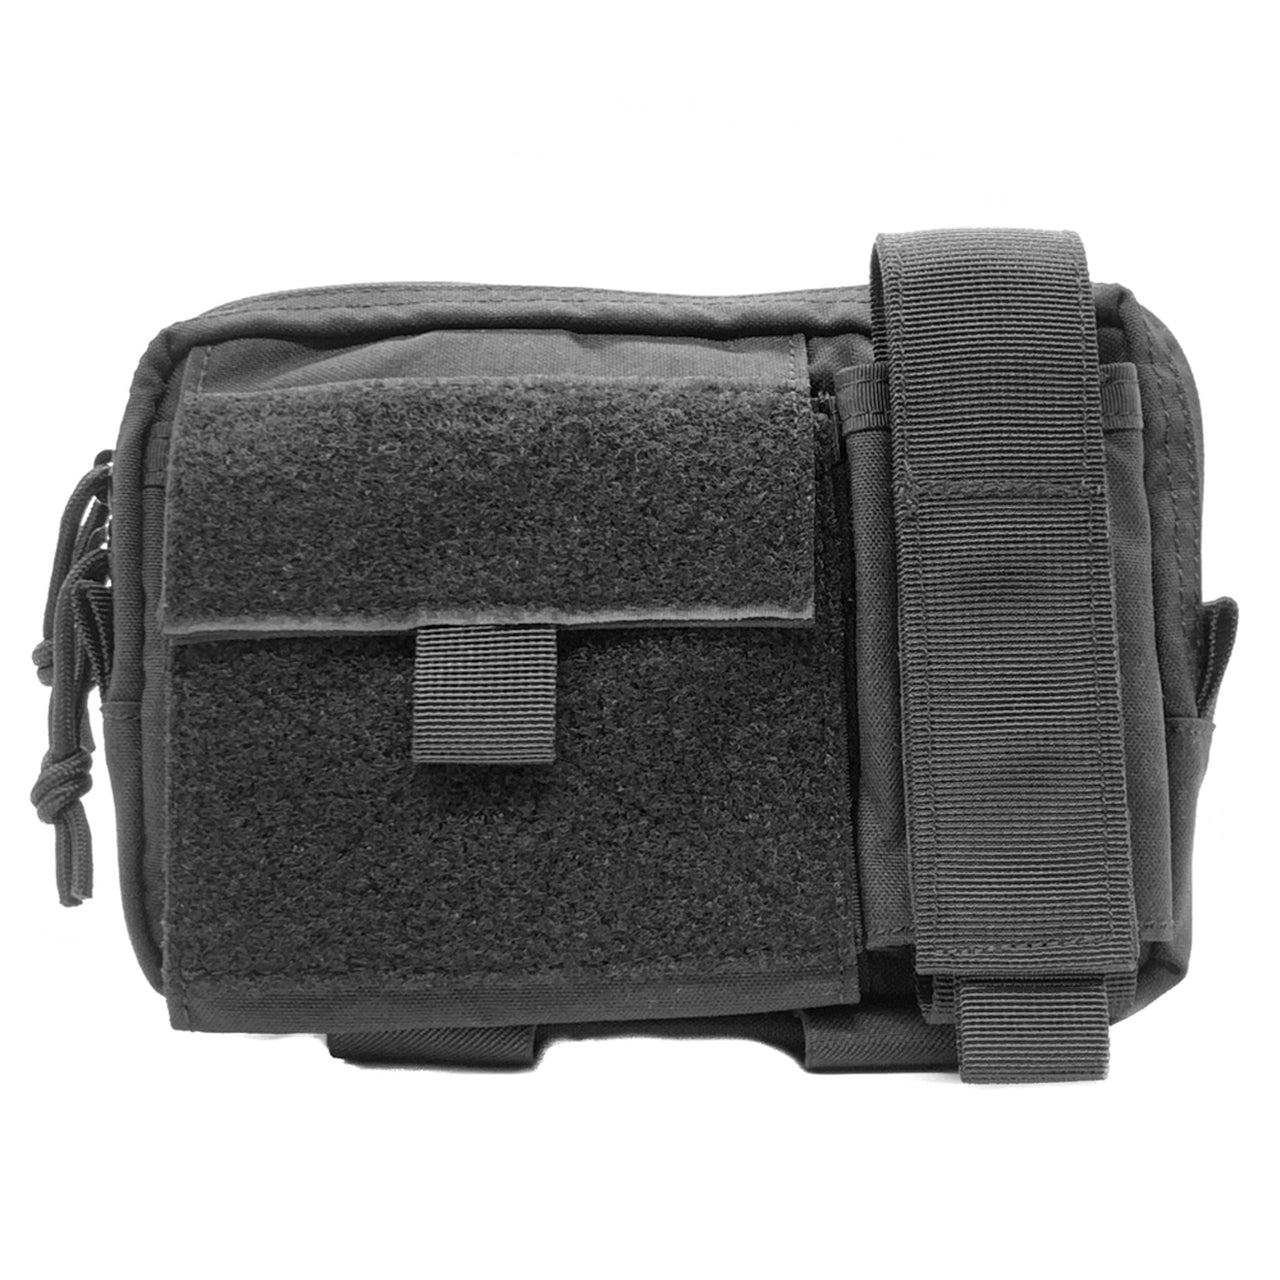 A Shellback Tactical Super Admin Pouch with a shoulder strap.